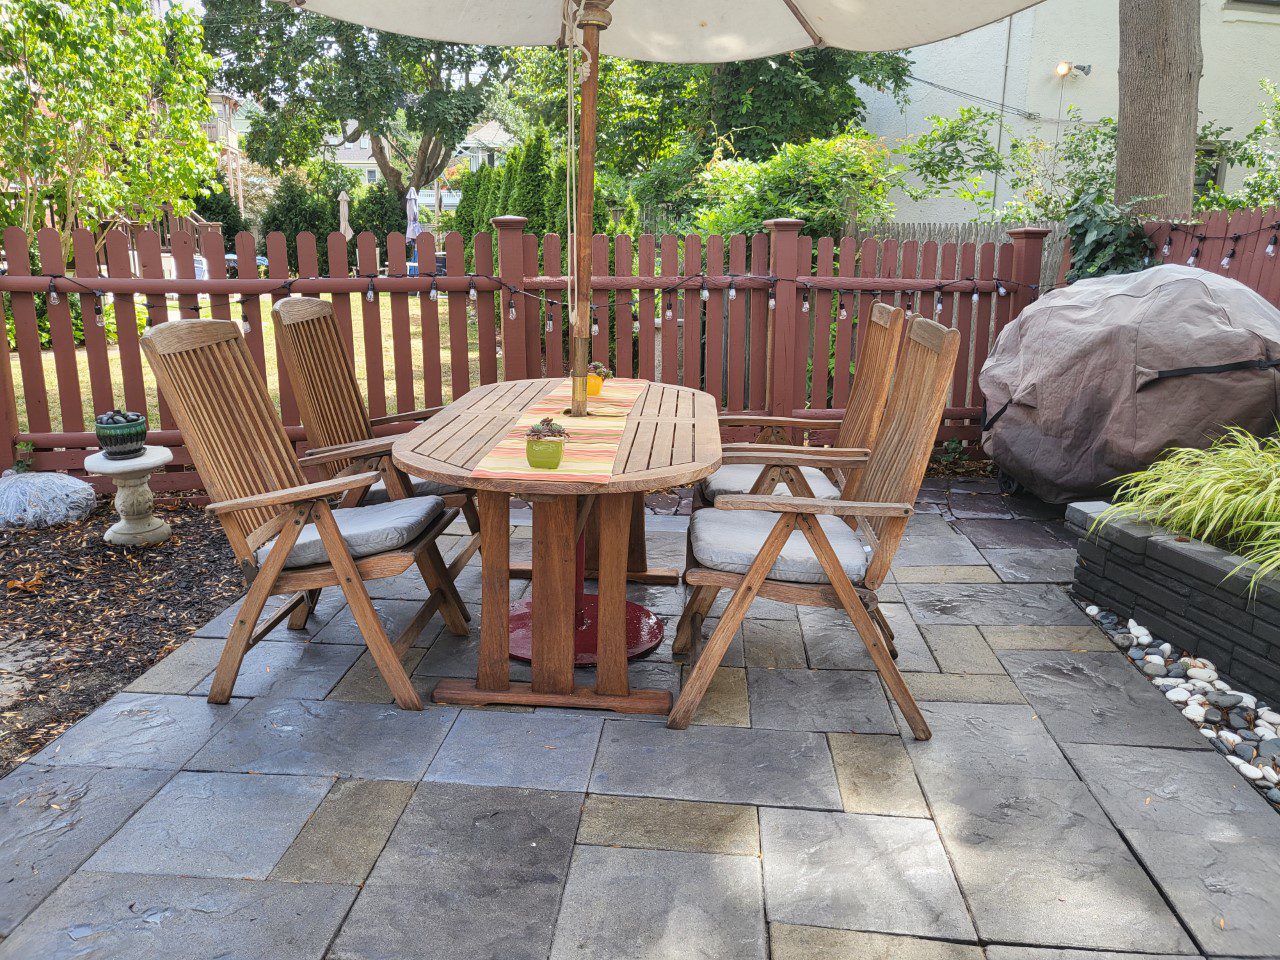 Image revealing the slate-like stamped concrete patio after application and drying of three distinct Antiquing stain colors, emphasizing the transformed, vibrant appearance of the surface